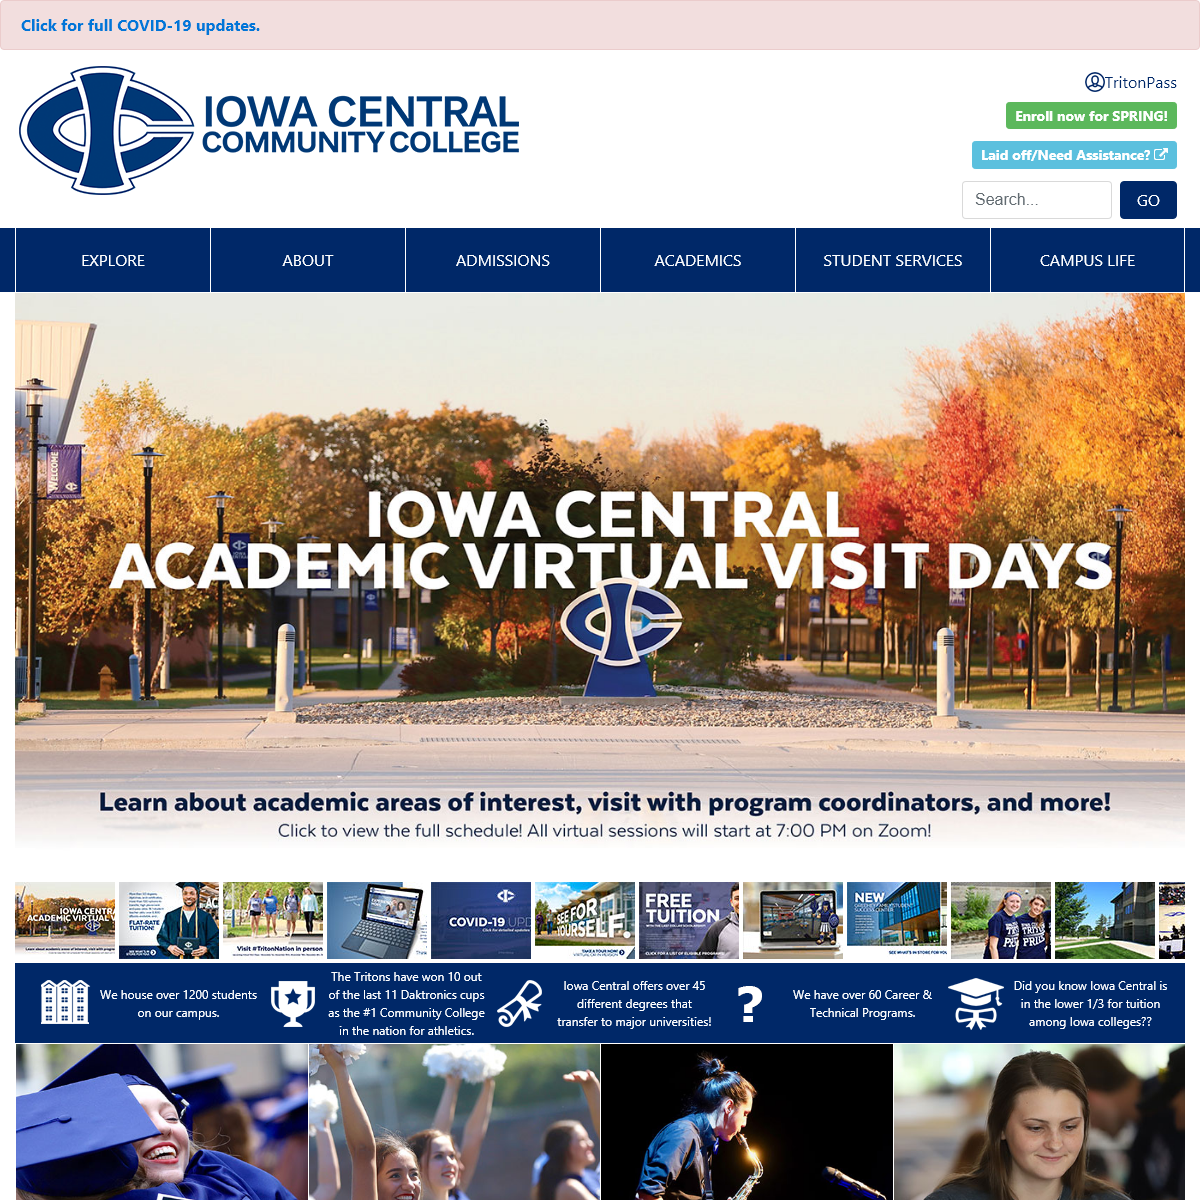 A complete backup of iowacentral.edu